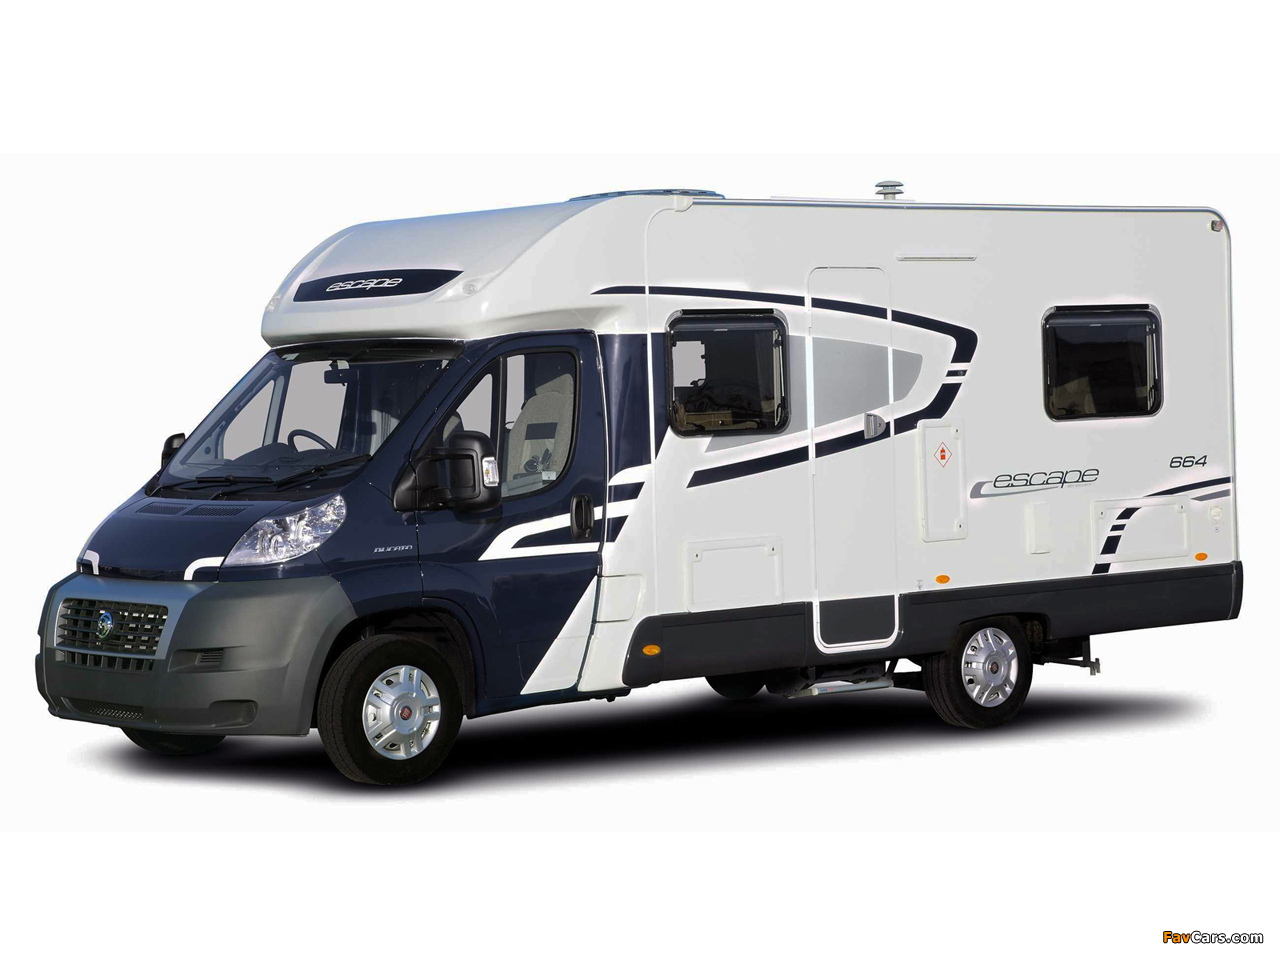 Swift Motorhomes Escape 664 2009 pictures (1280 x 960)